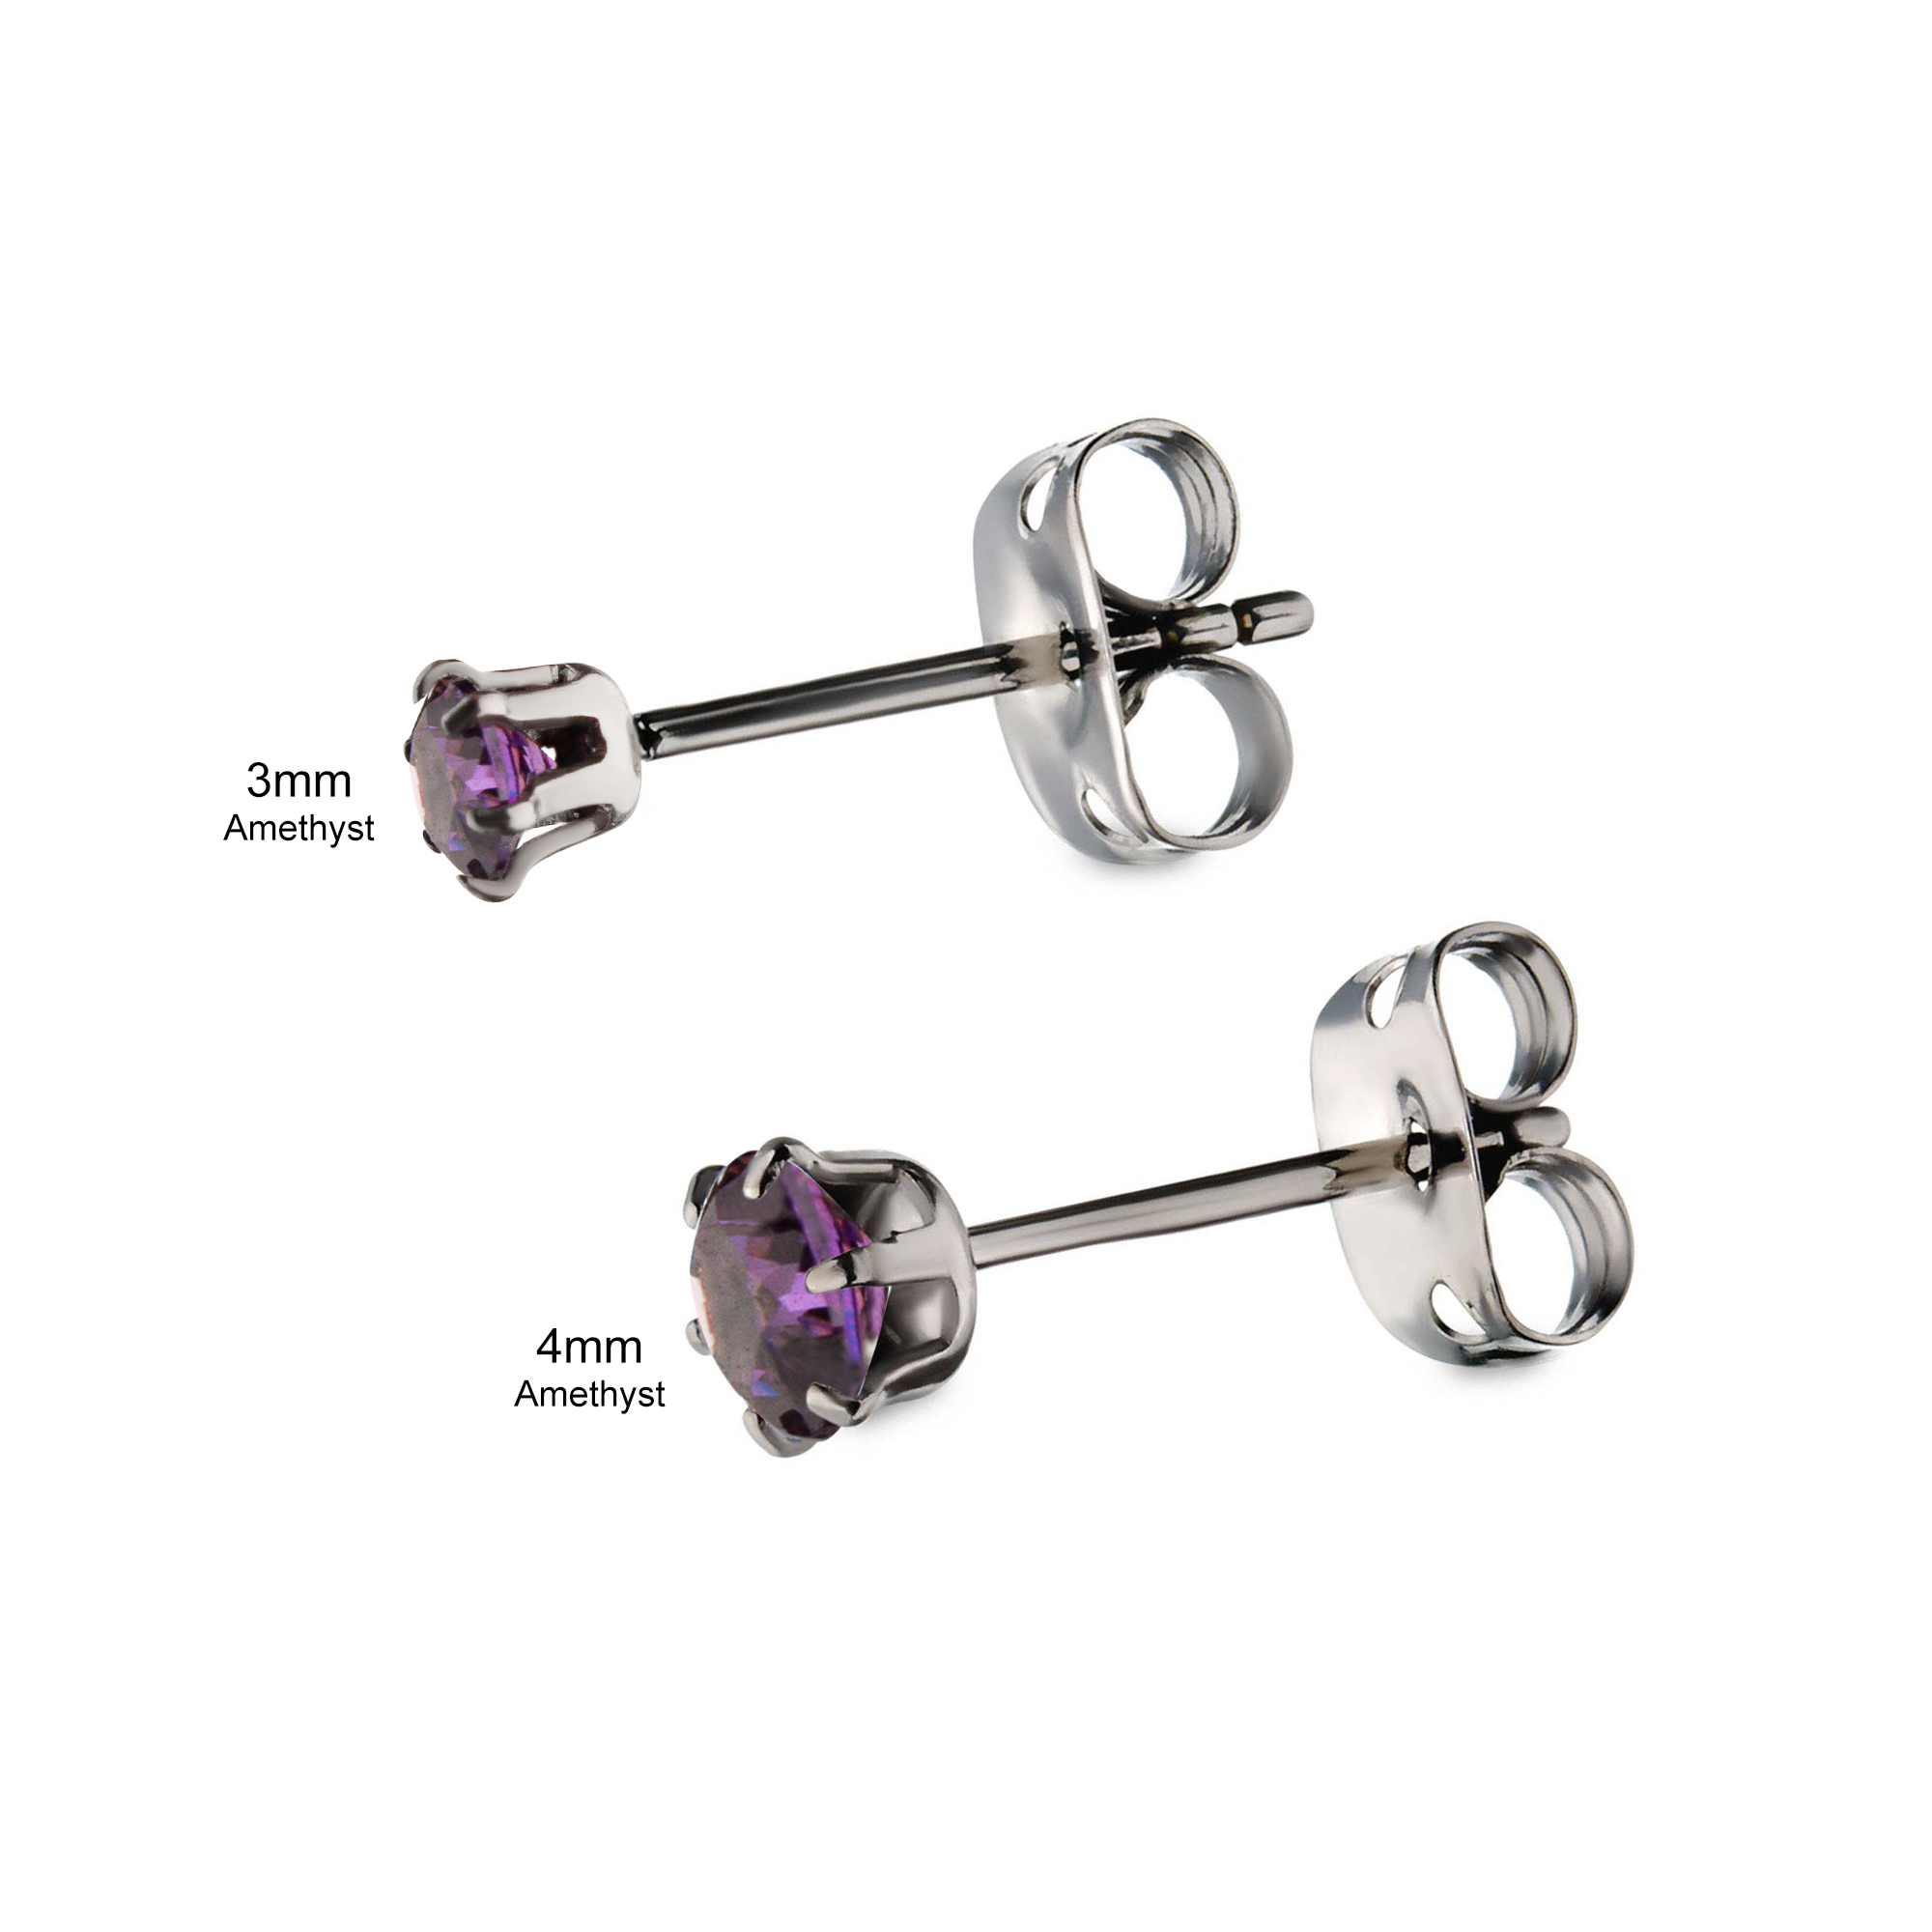 20g Titanium Post and Butterfly Back with Prong Set CZ Stud Earrings Image 5 Enchanted Jewelry Plainfield, CT